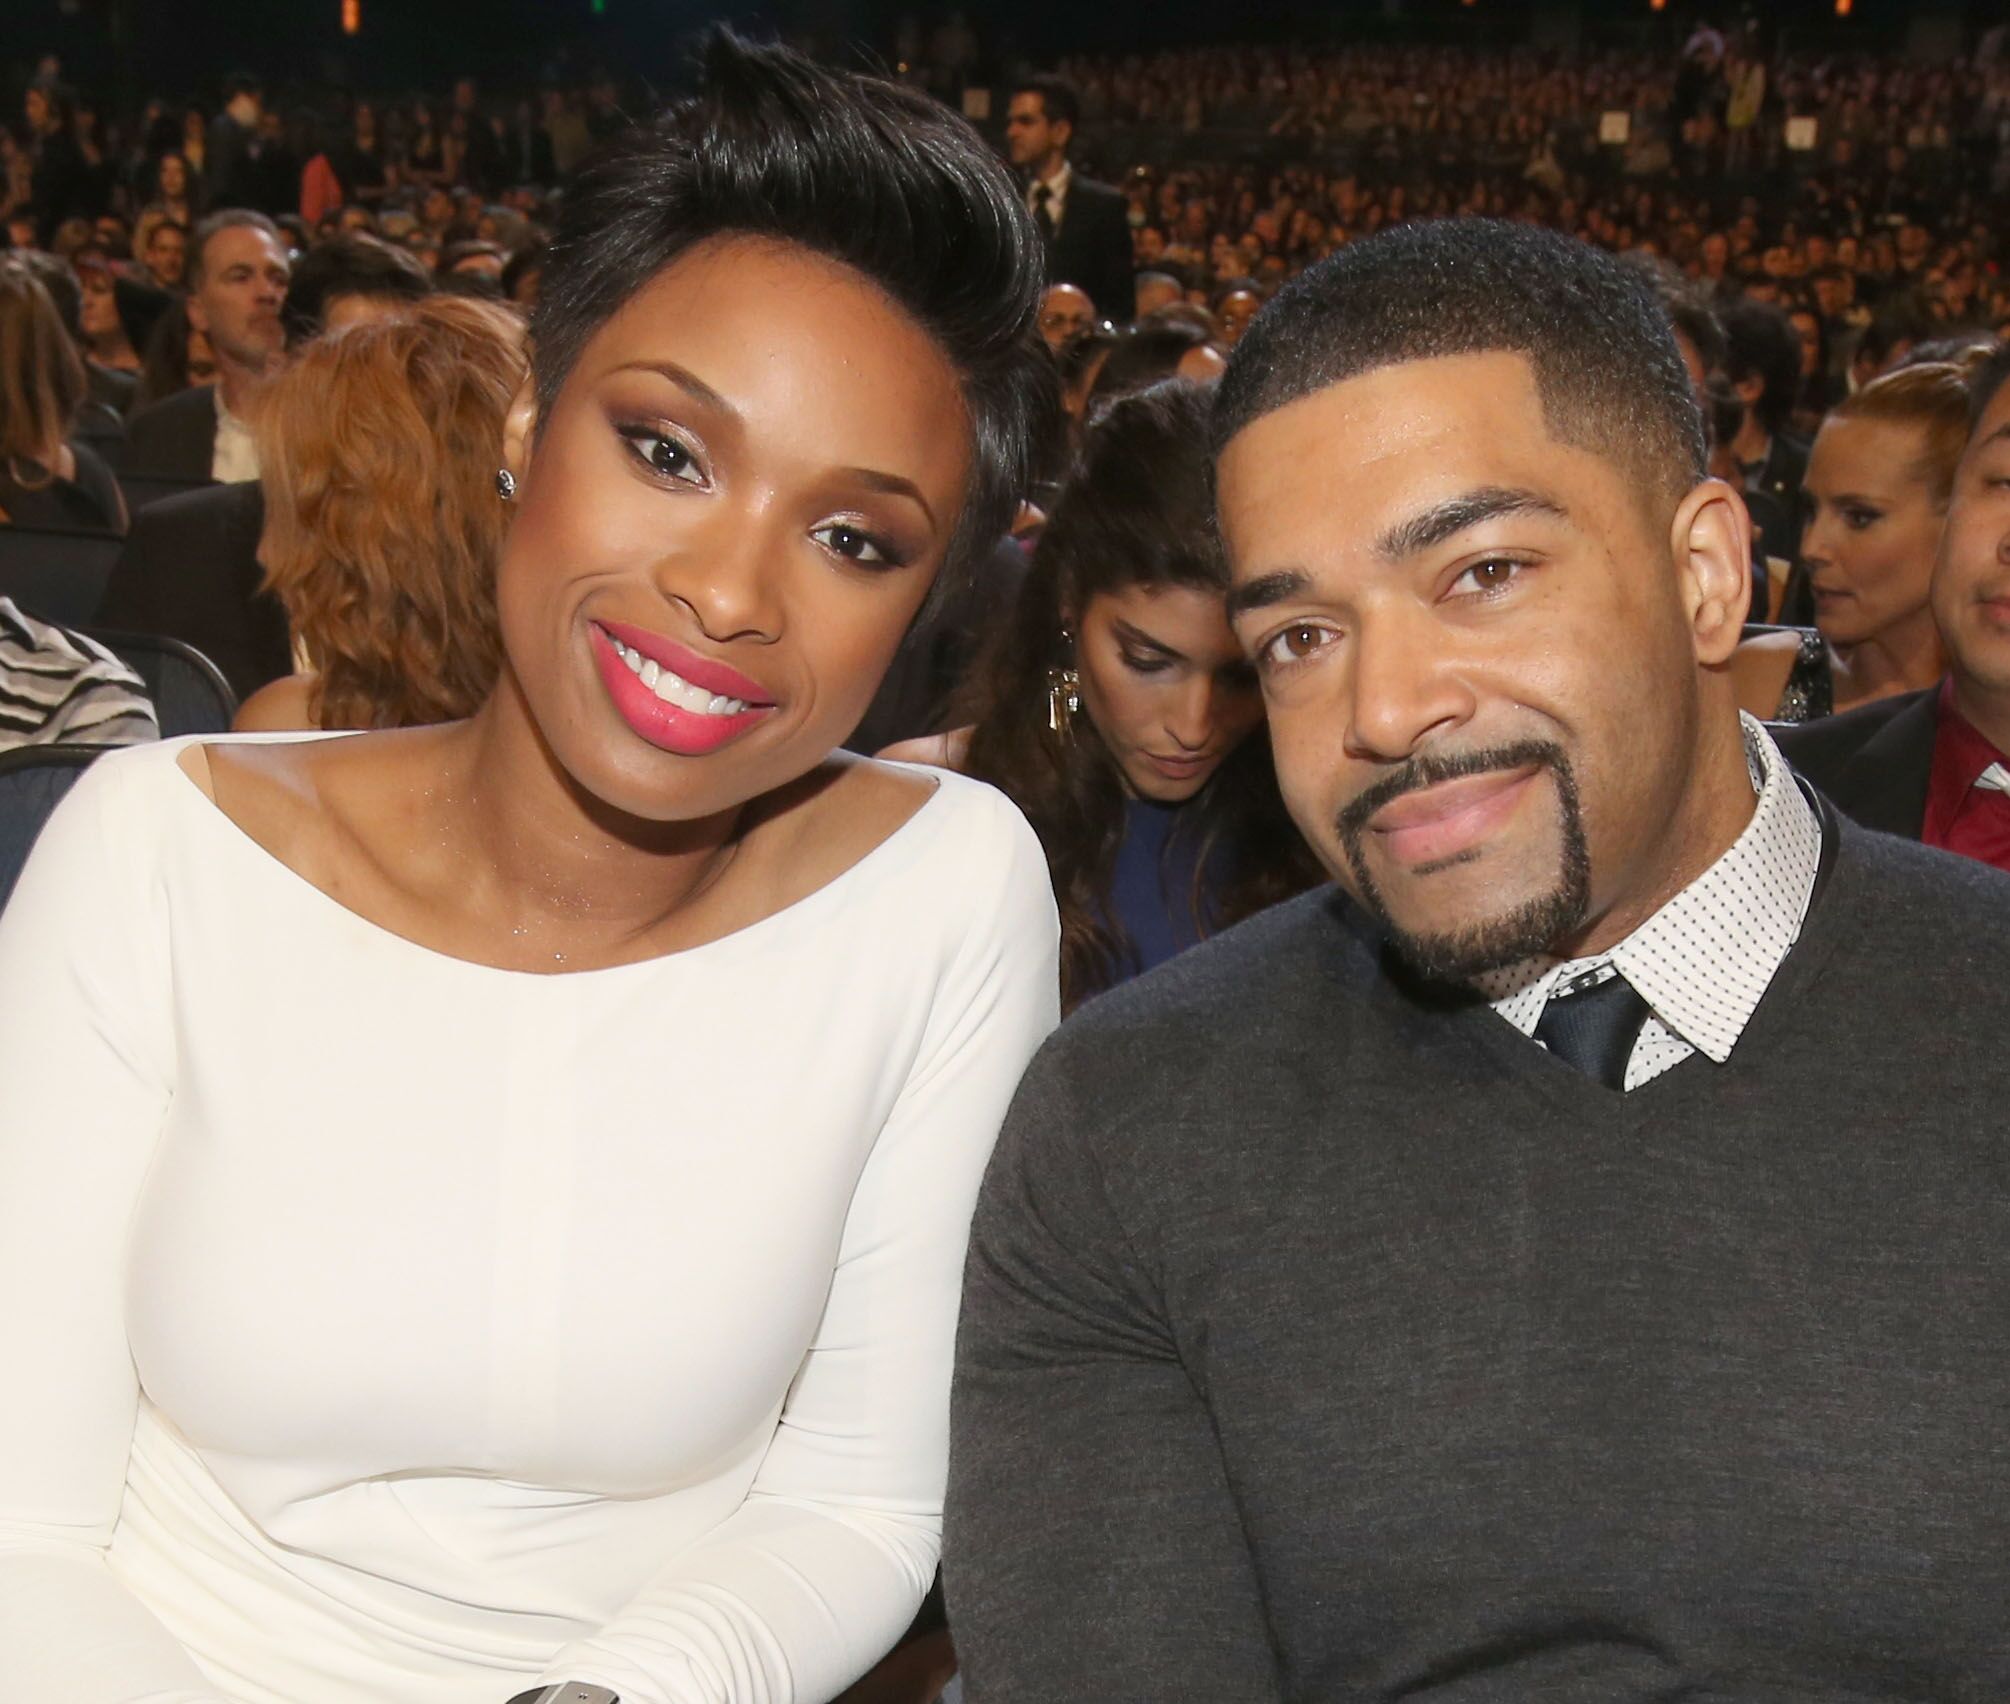 Jennifer Hudson (L) and David Otunga attend The 40th Annual People's Choice Awards at Nokia Theatre L.A. Live | Photo: Getty Images